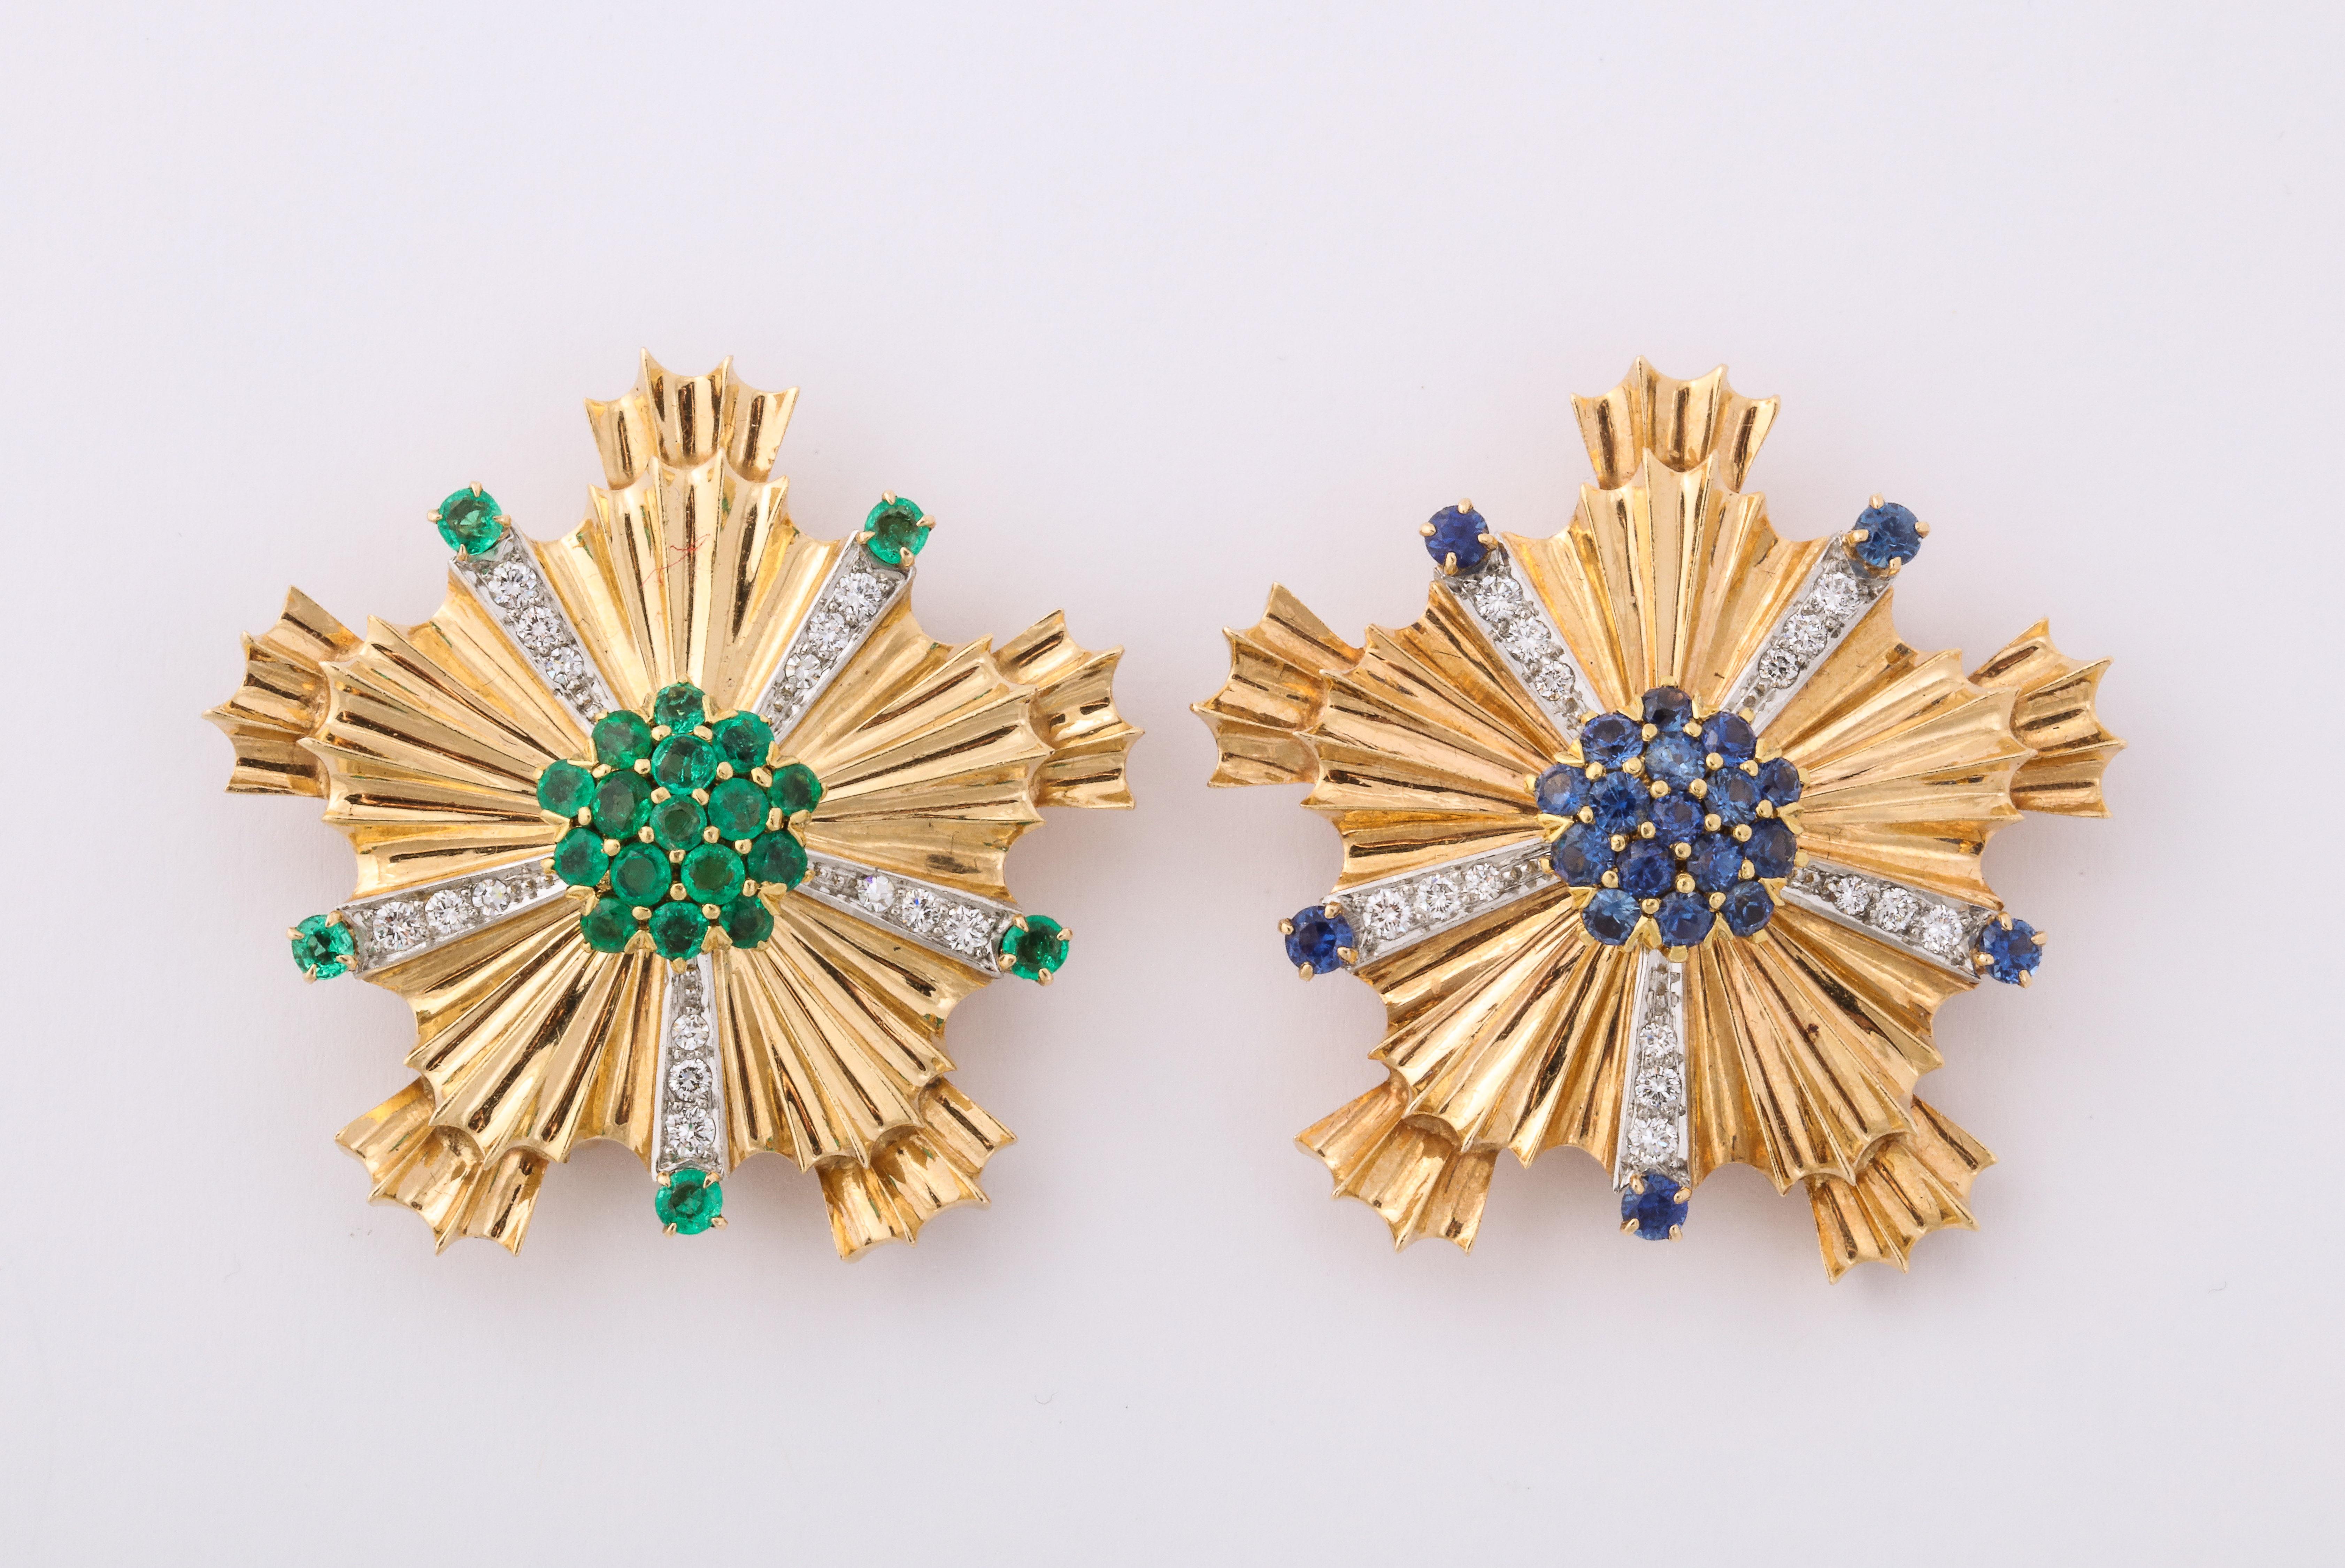 Tiffany Pair of Sapphire Emerald Diamond Gold brooches. 14K Yellow Gold, 21 single cut blue sapphires, 21 single cut emeralds, 40 fine white full cut diamonds. Marked Tiffany & Co.  Circa 1950. 

Materials:  
14K Yellow Gold.  44 grams.

Stones: 
21